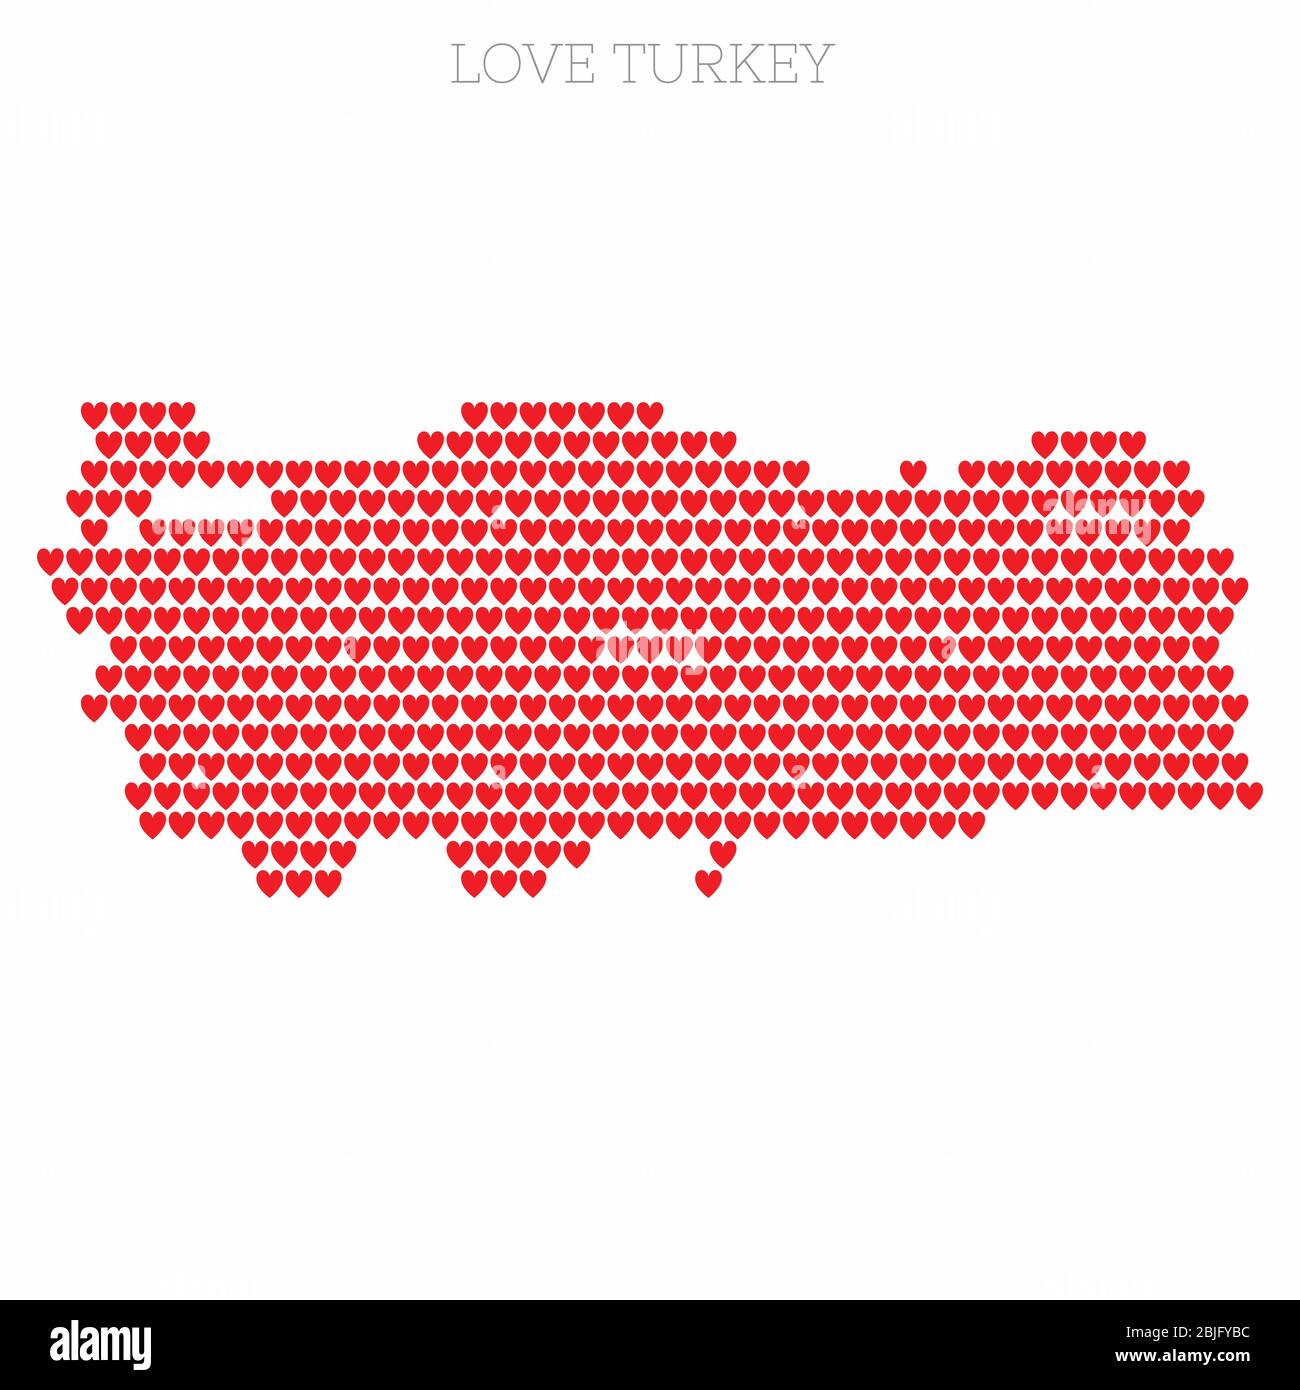 Turkey country map made from love heart halftone pattern Stock Vector